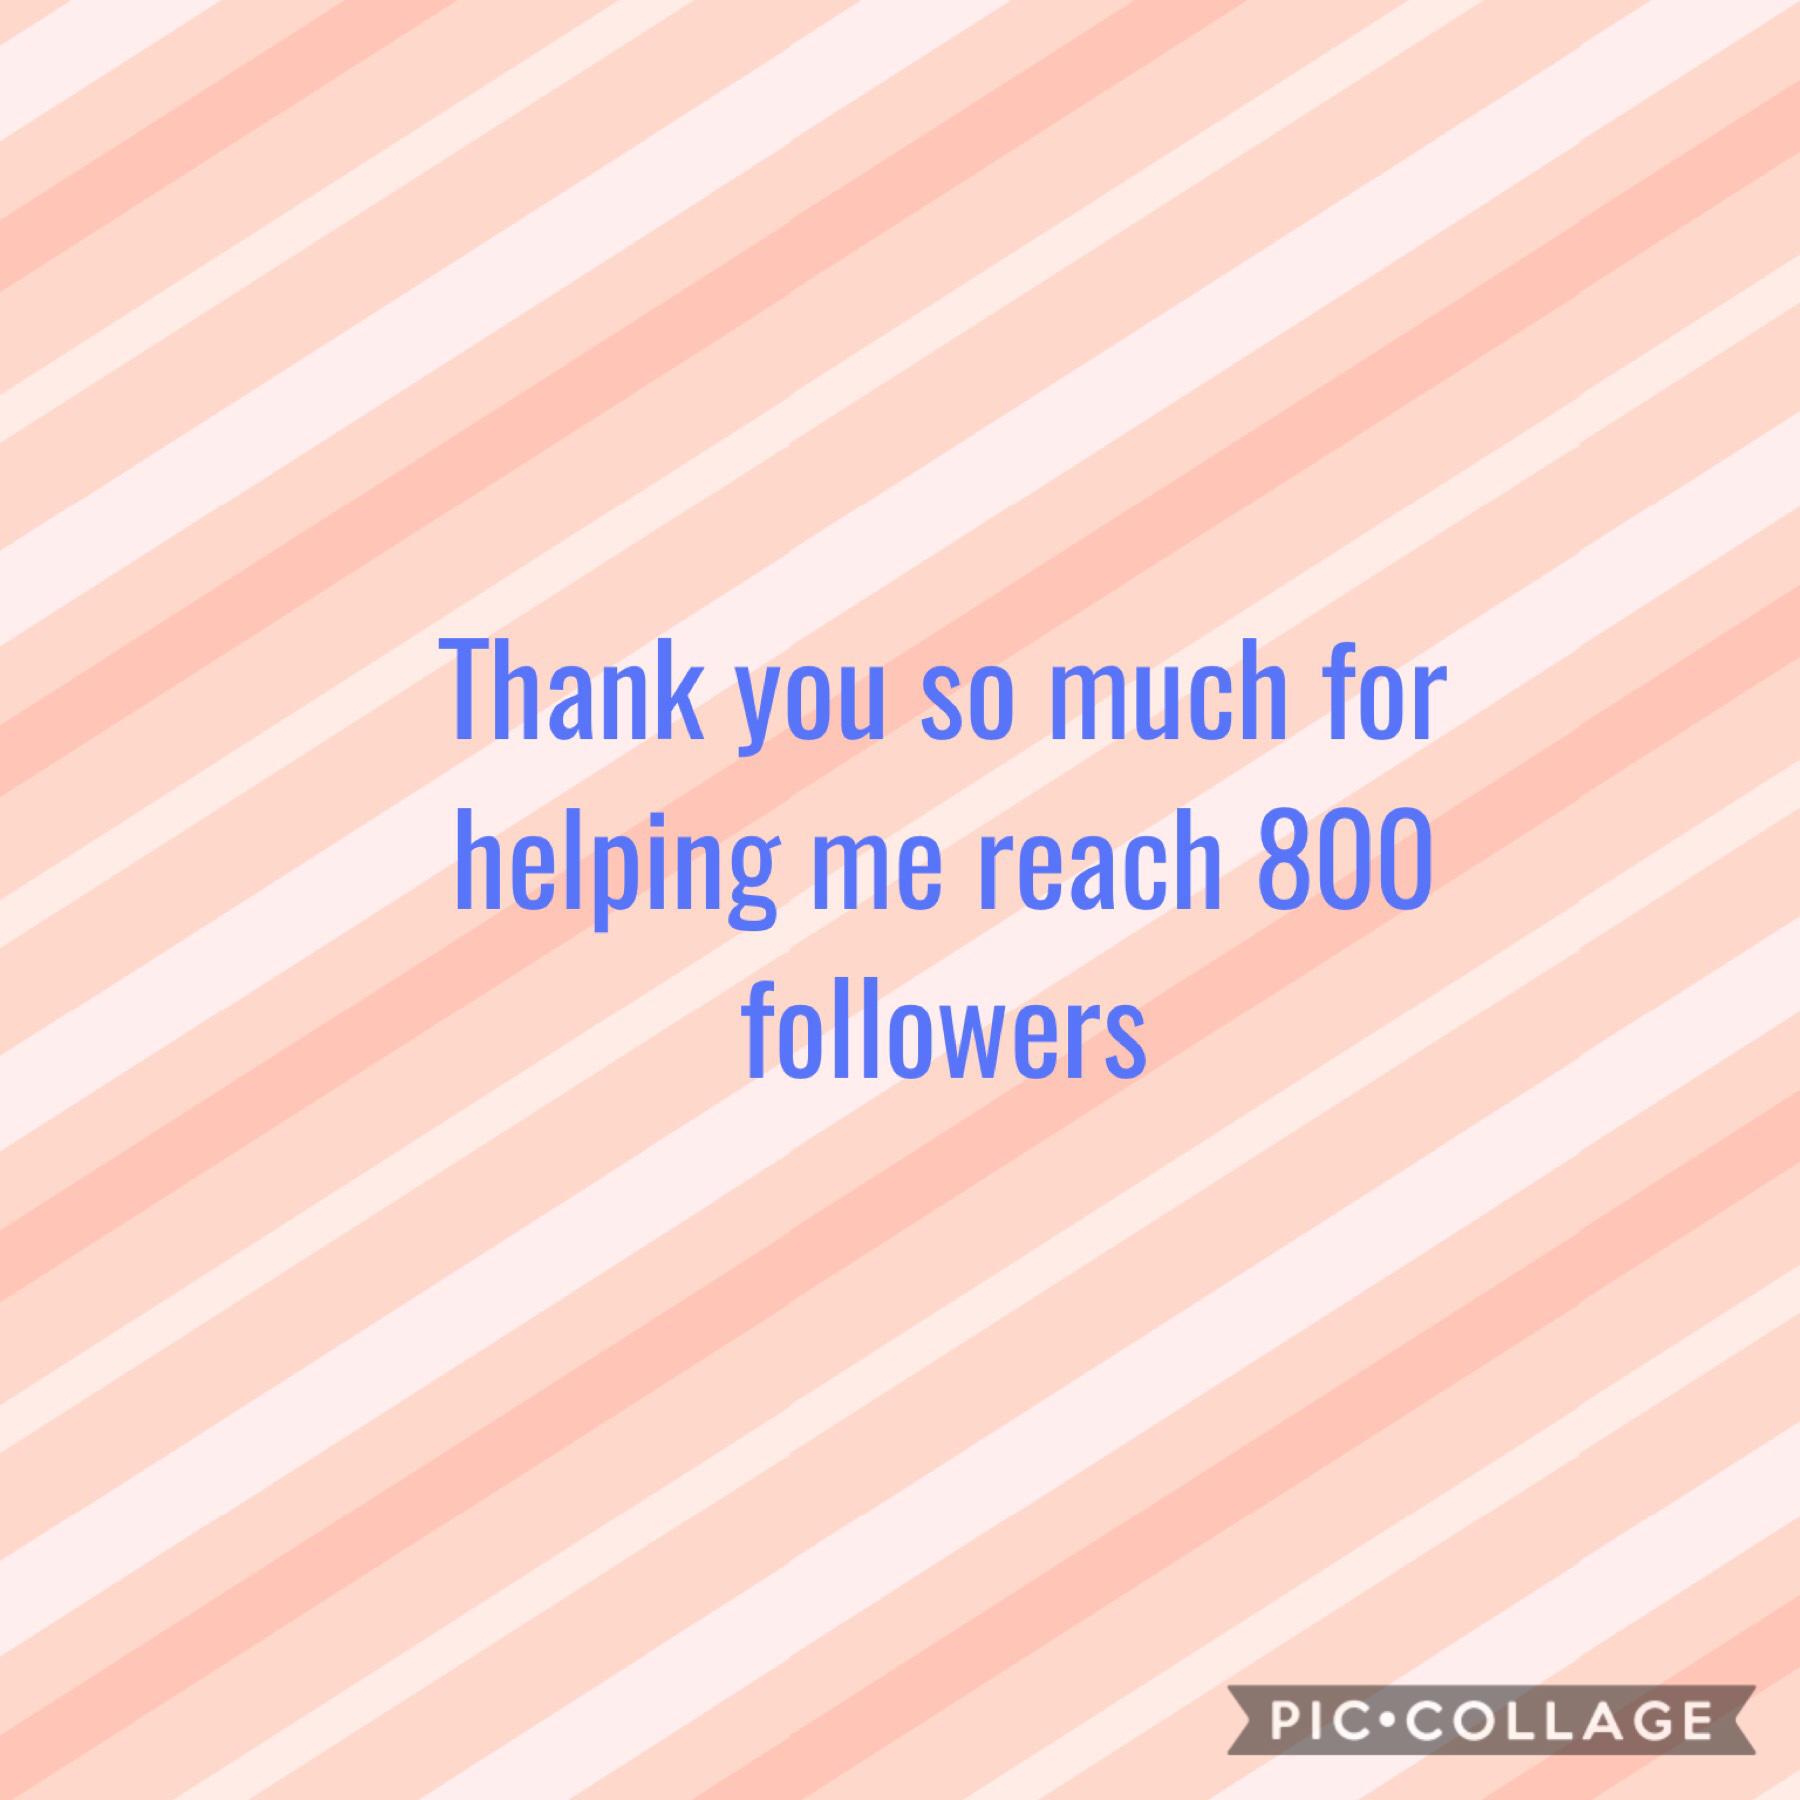 Thanks for helping me reach 800 followers